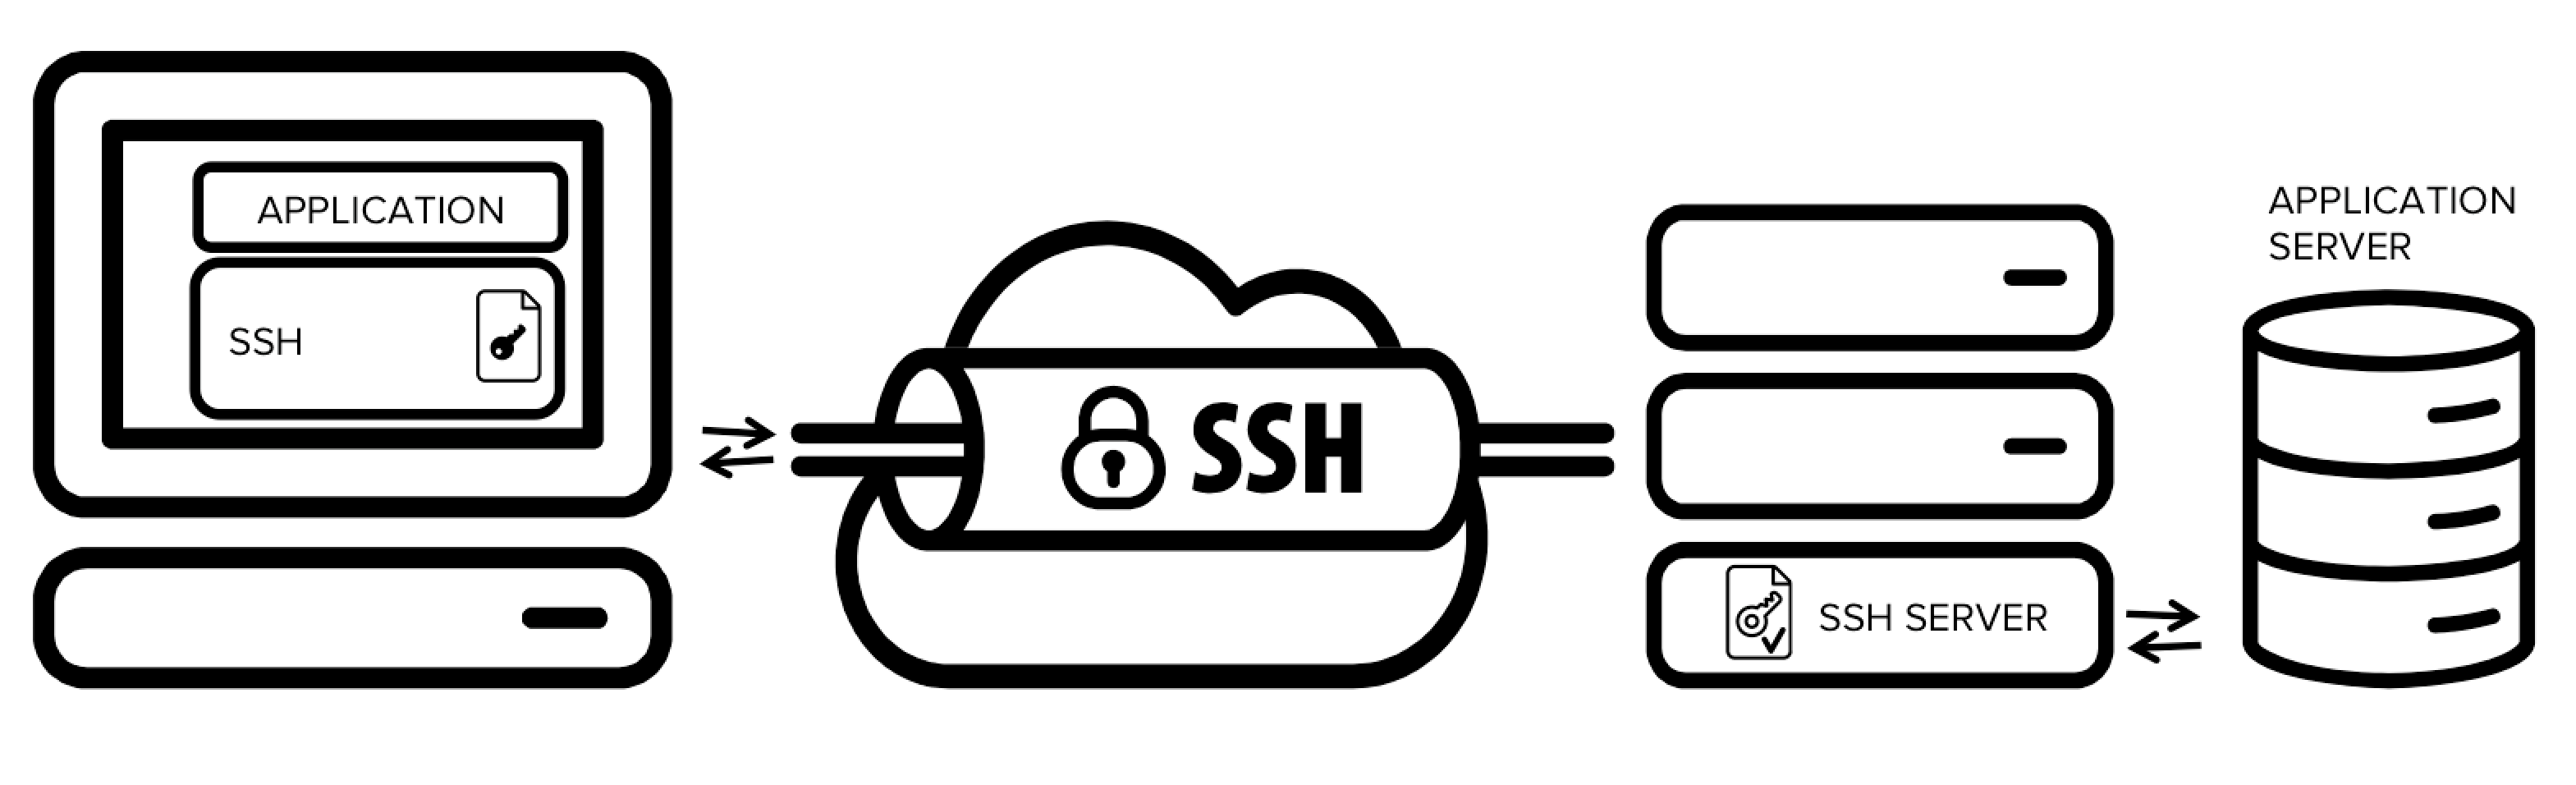 ../../_images/ssh_tunneling_secure_app.png